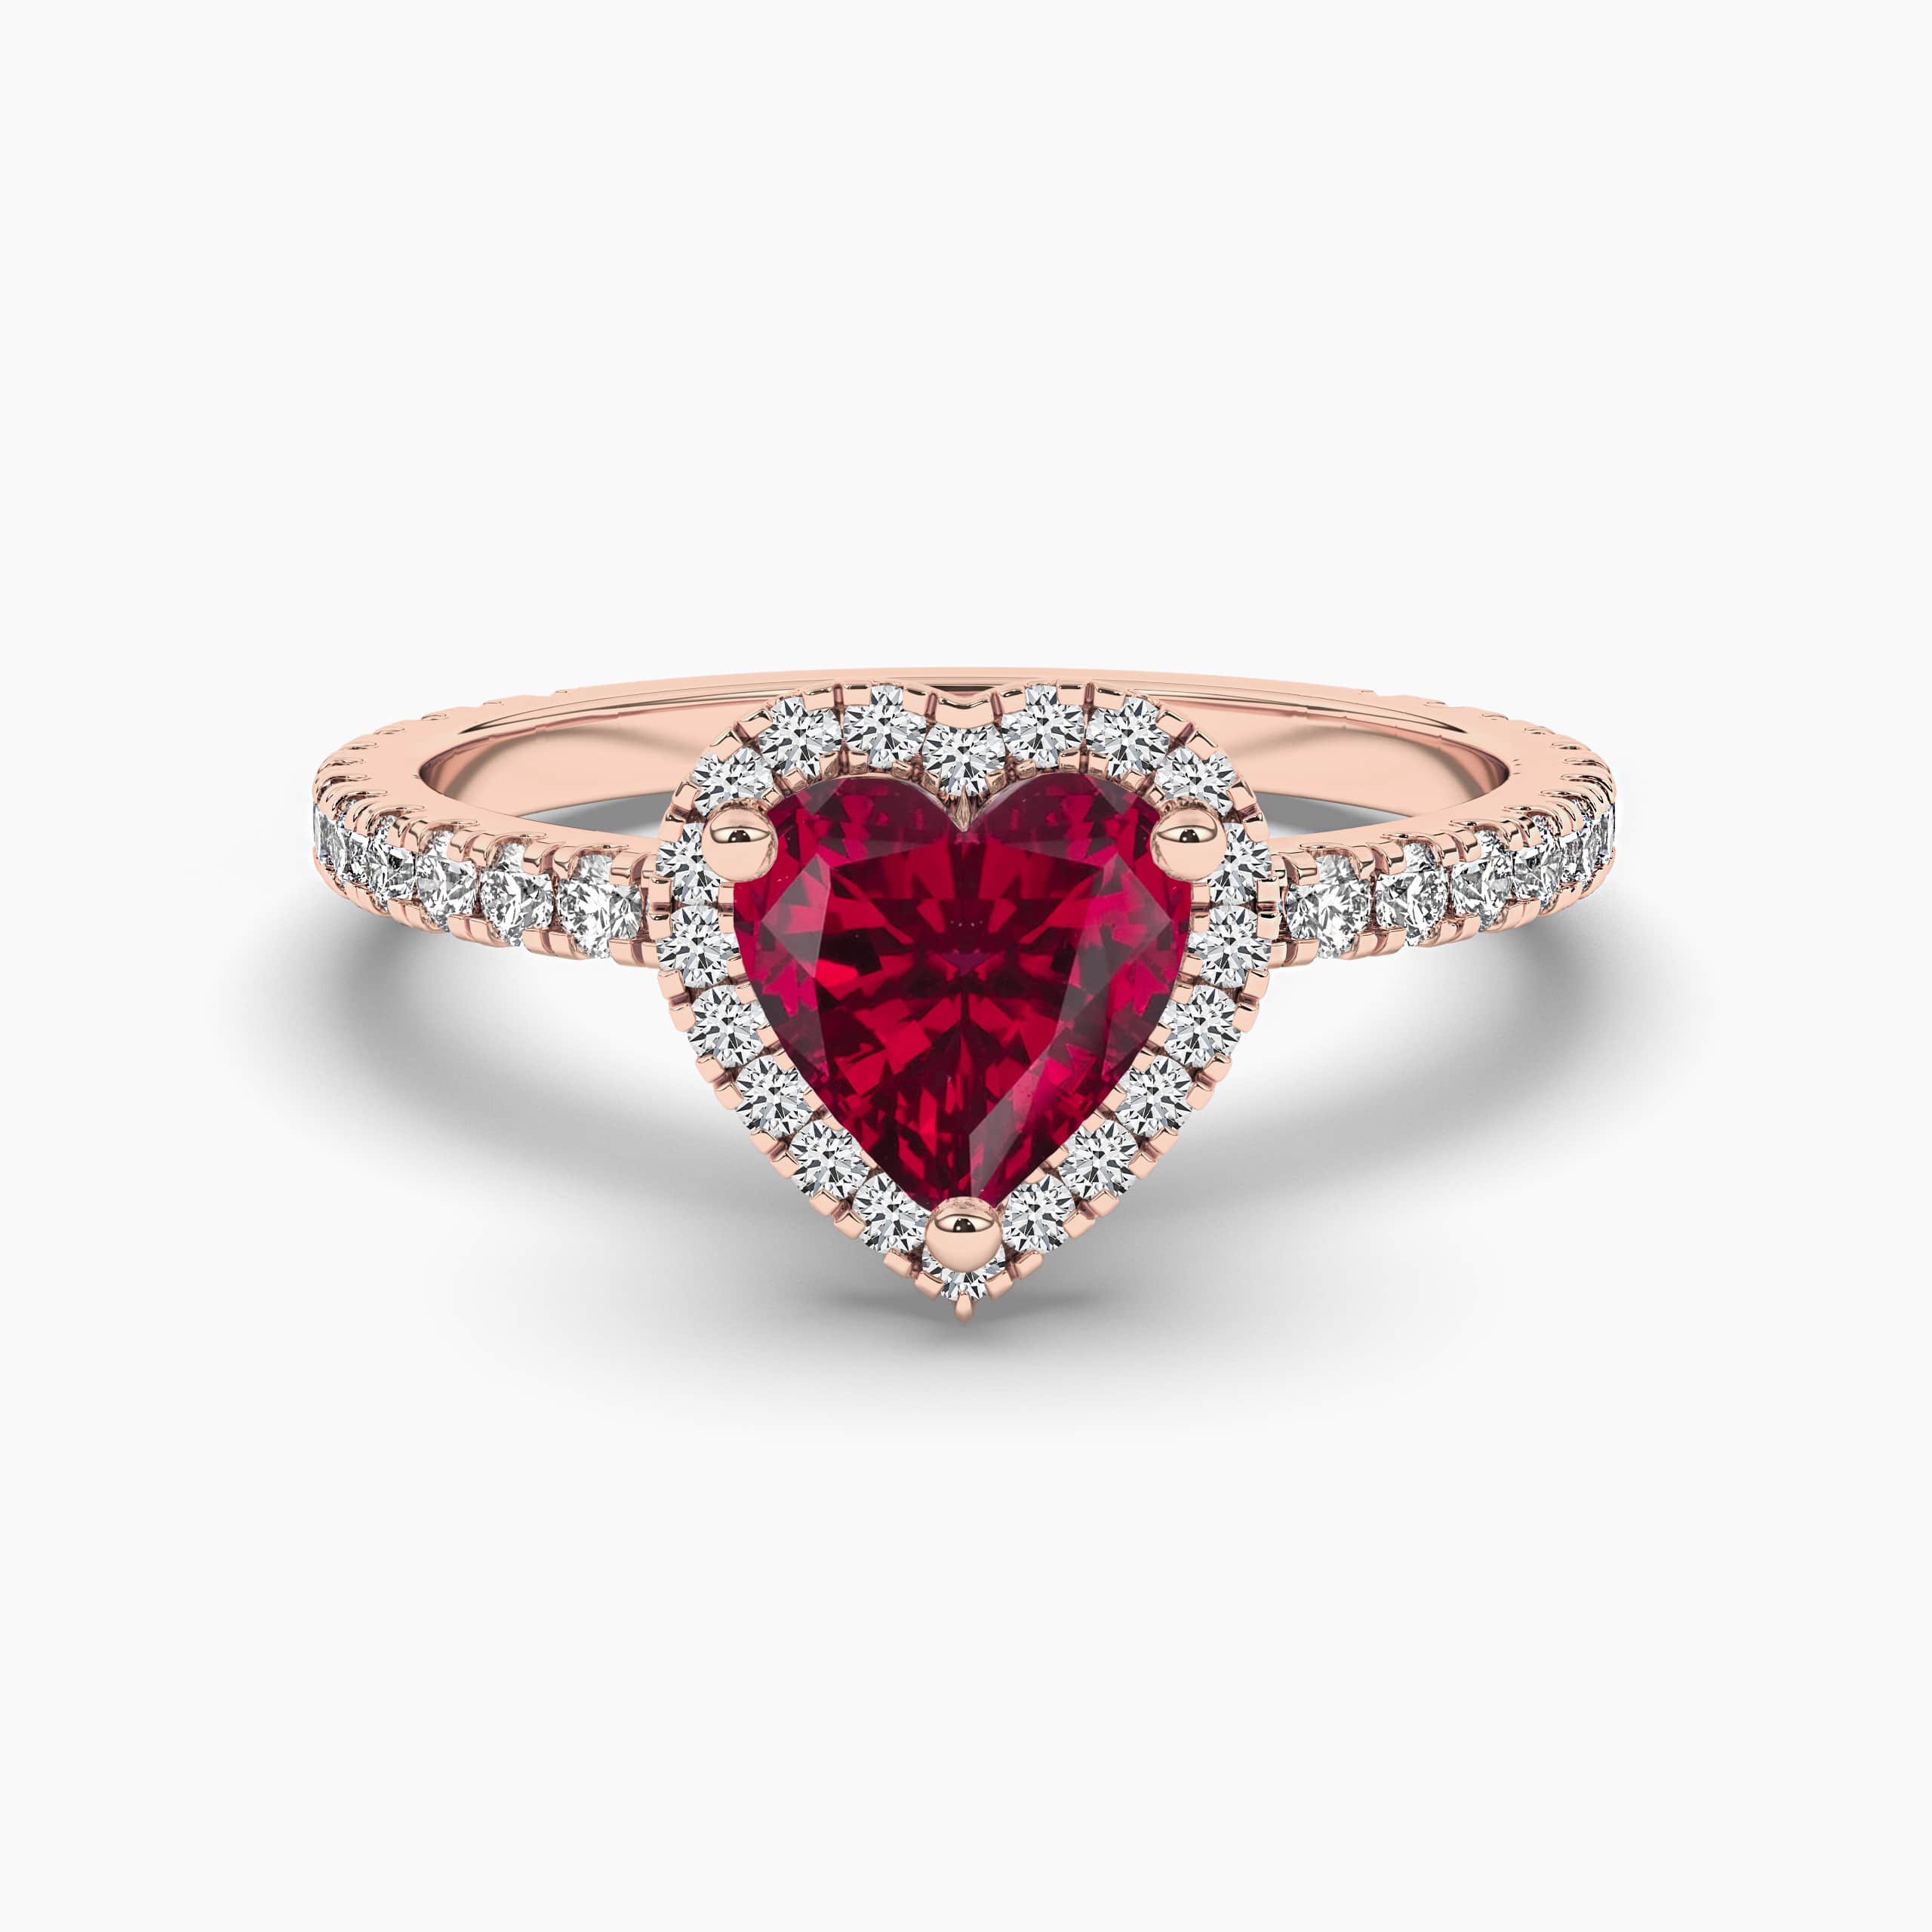 HEART SHAPED RUBY AND DIAMOND RING ROSE GOLD FOR WOMAN'S